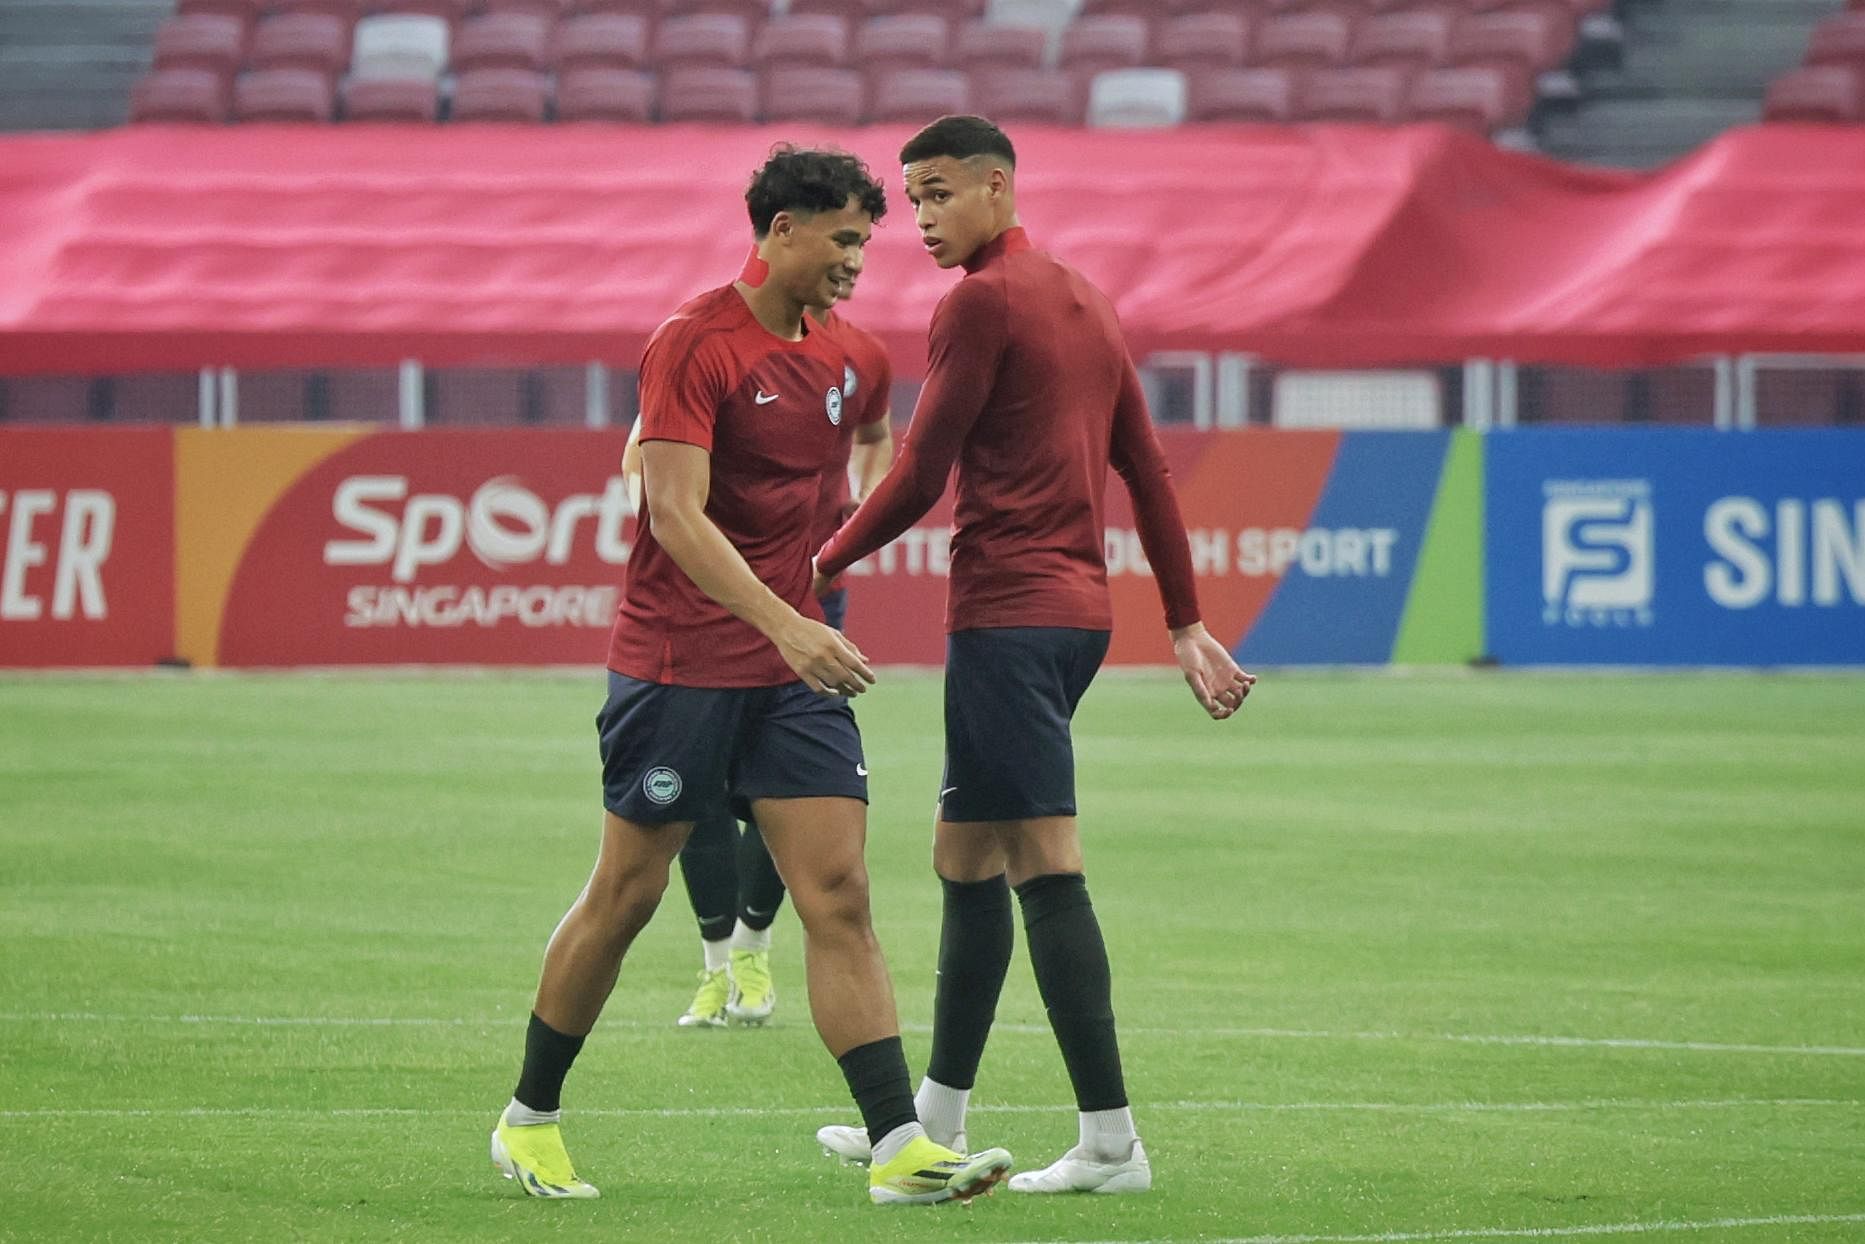 Fit-again forwards Ikhsan and Ilhan Fandi set to resume partnership in Lions’ clash with China